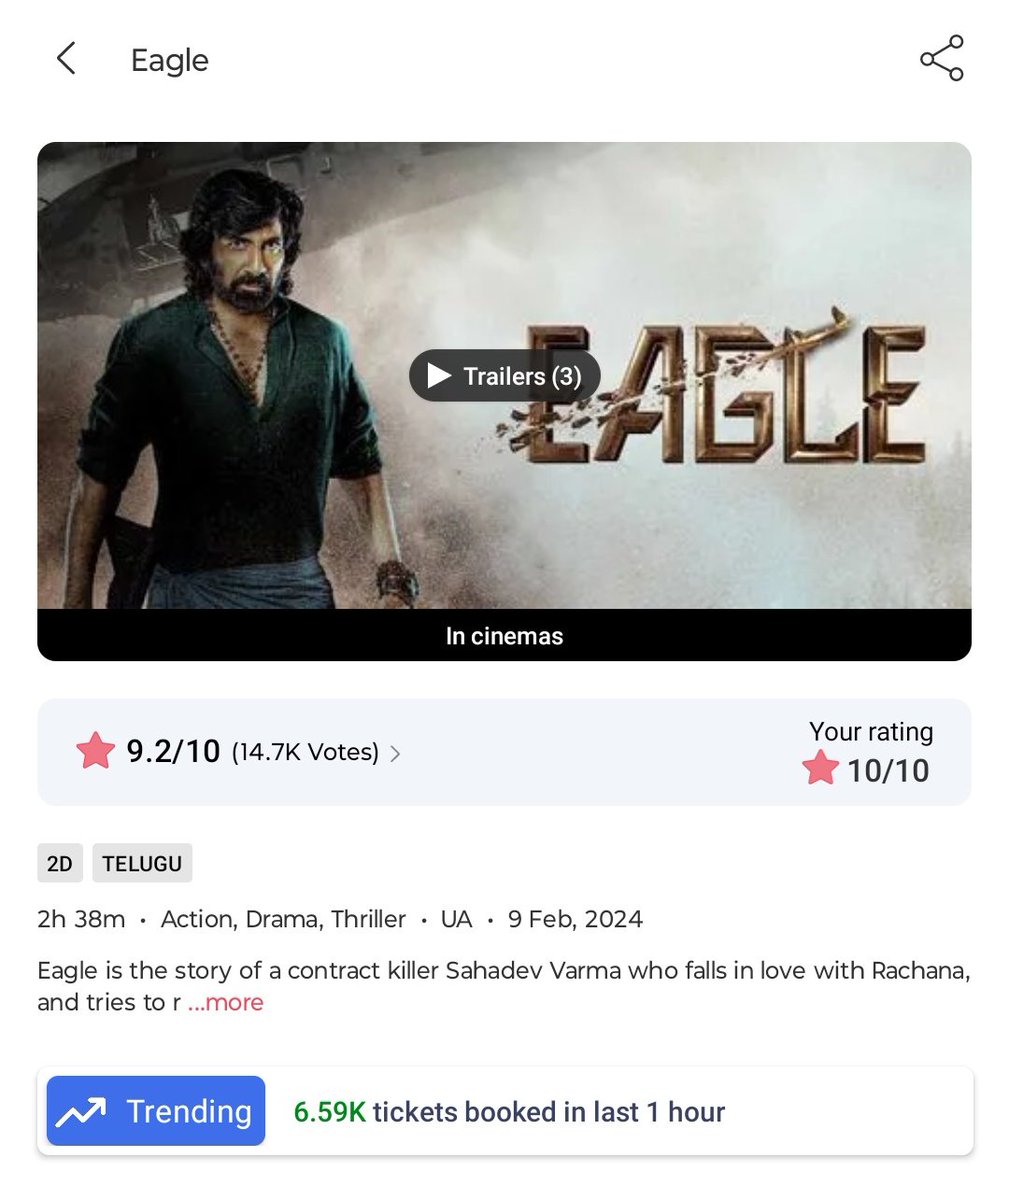 #Eagle 6.59K bookings last hour 💥
Highest from morning 👌👌

#BlockBusterEagle 🦅🔥